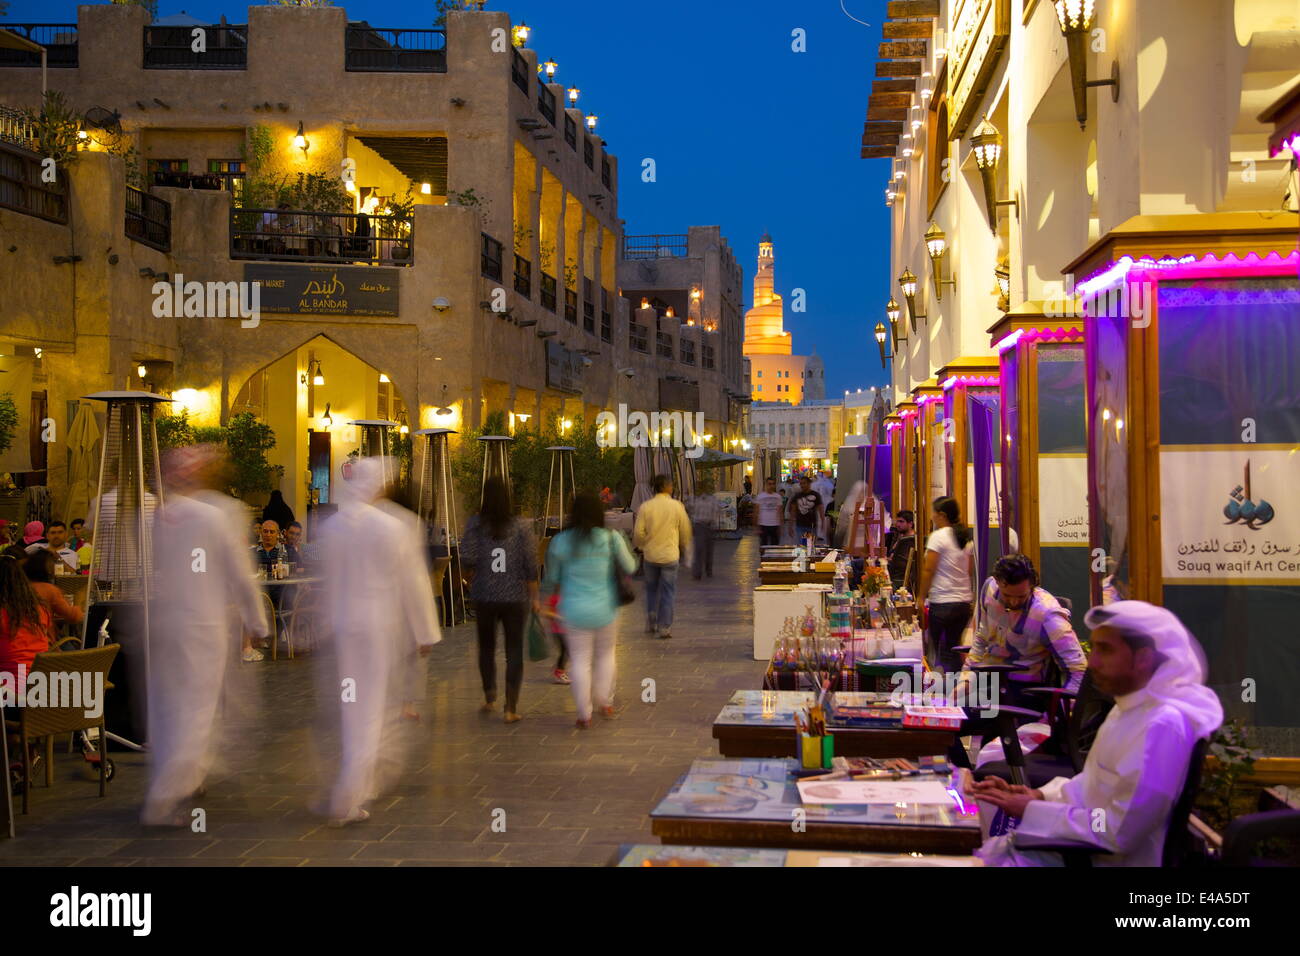 Souq Waqif looking towards the illuminated spiral mosque of the Kassem Darwish Fakhroo Islamic Centre, Doha, Qatar, Middle East Stock Photo